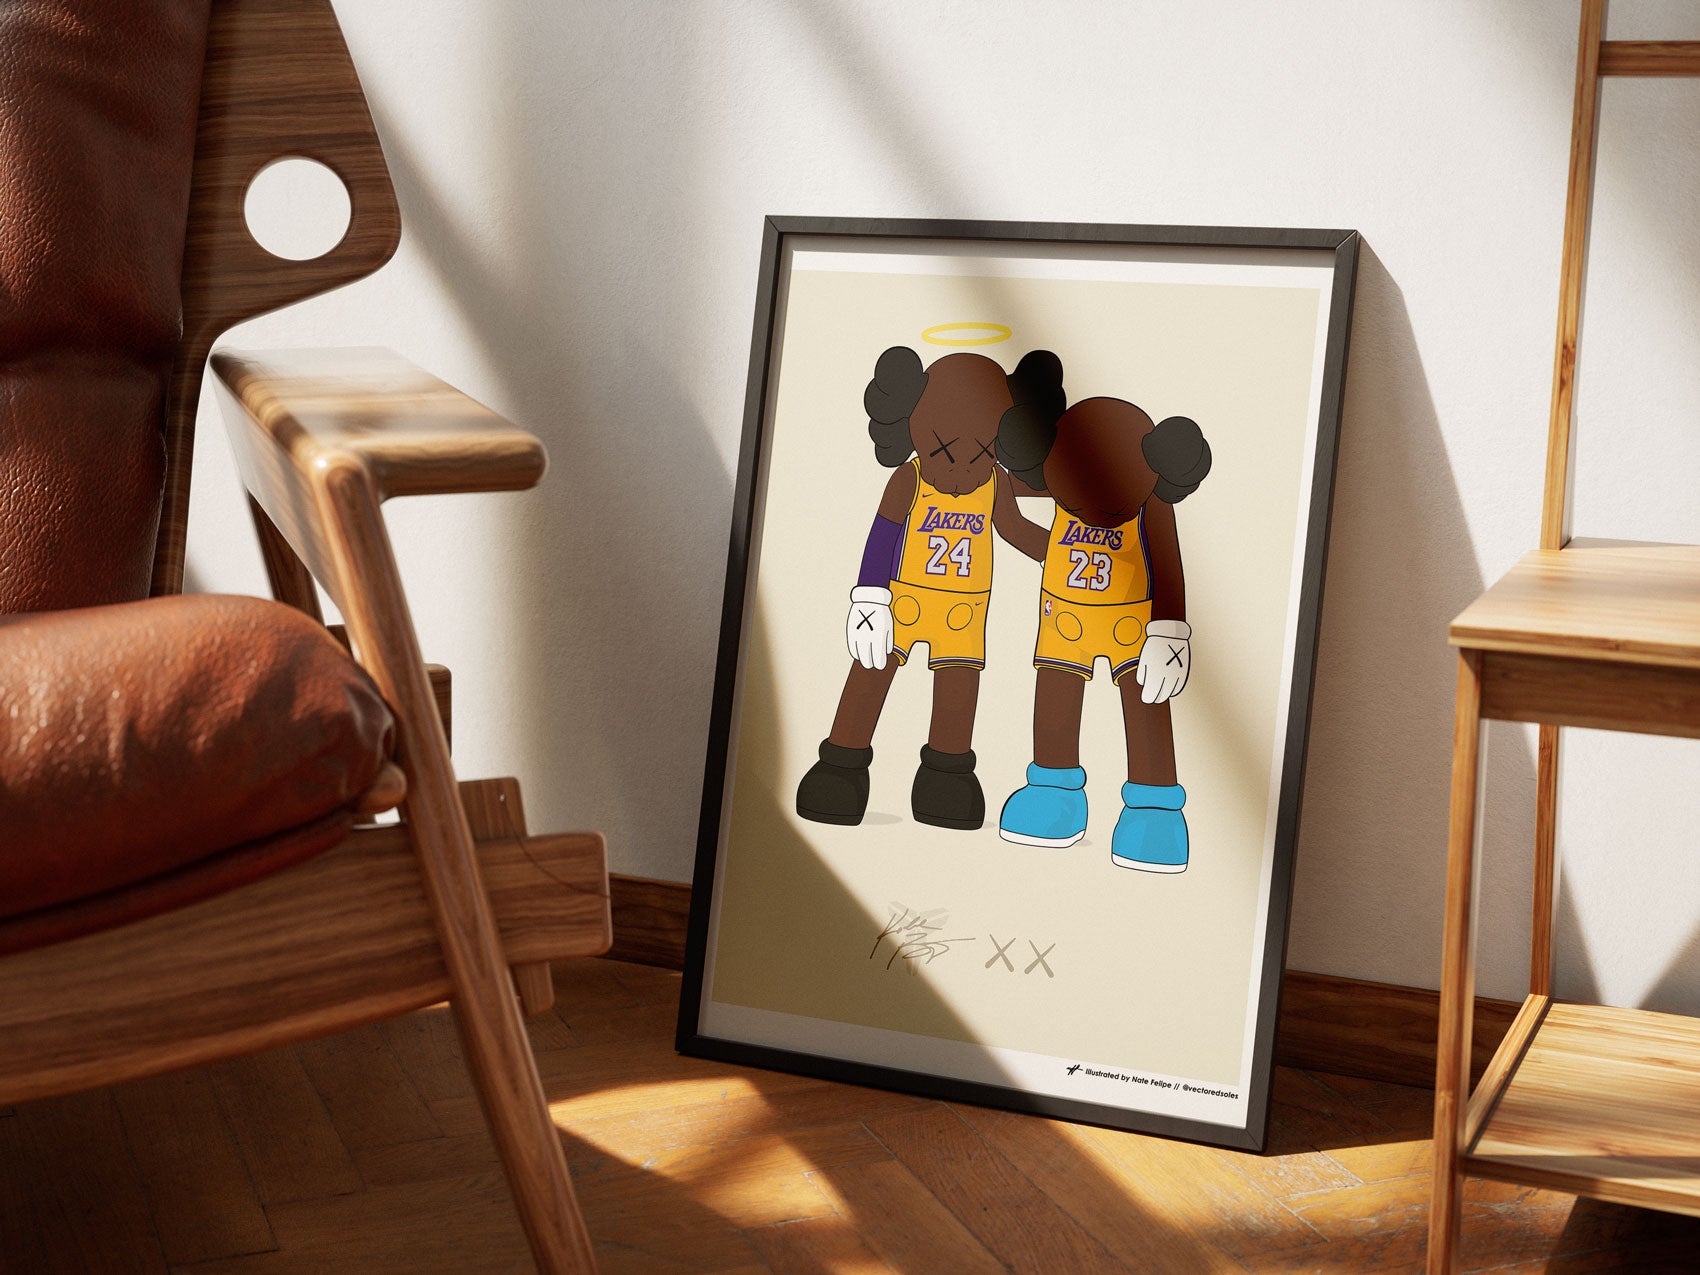 Continuing to Move the Game Forward - Kaws x Kobe Bryant Poster